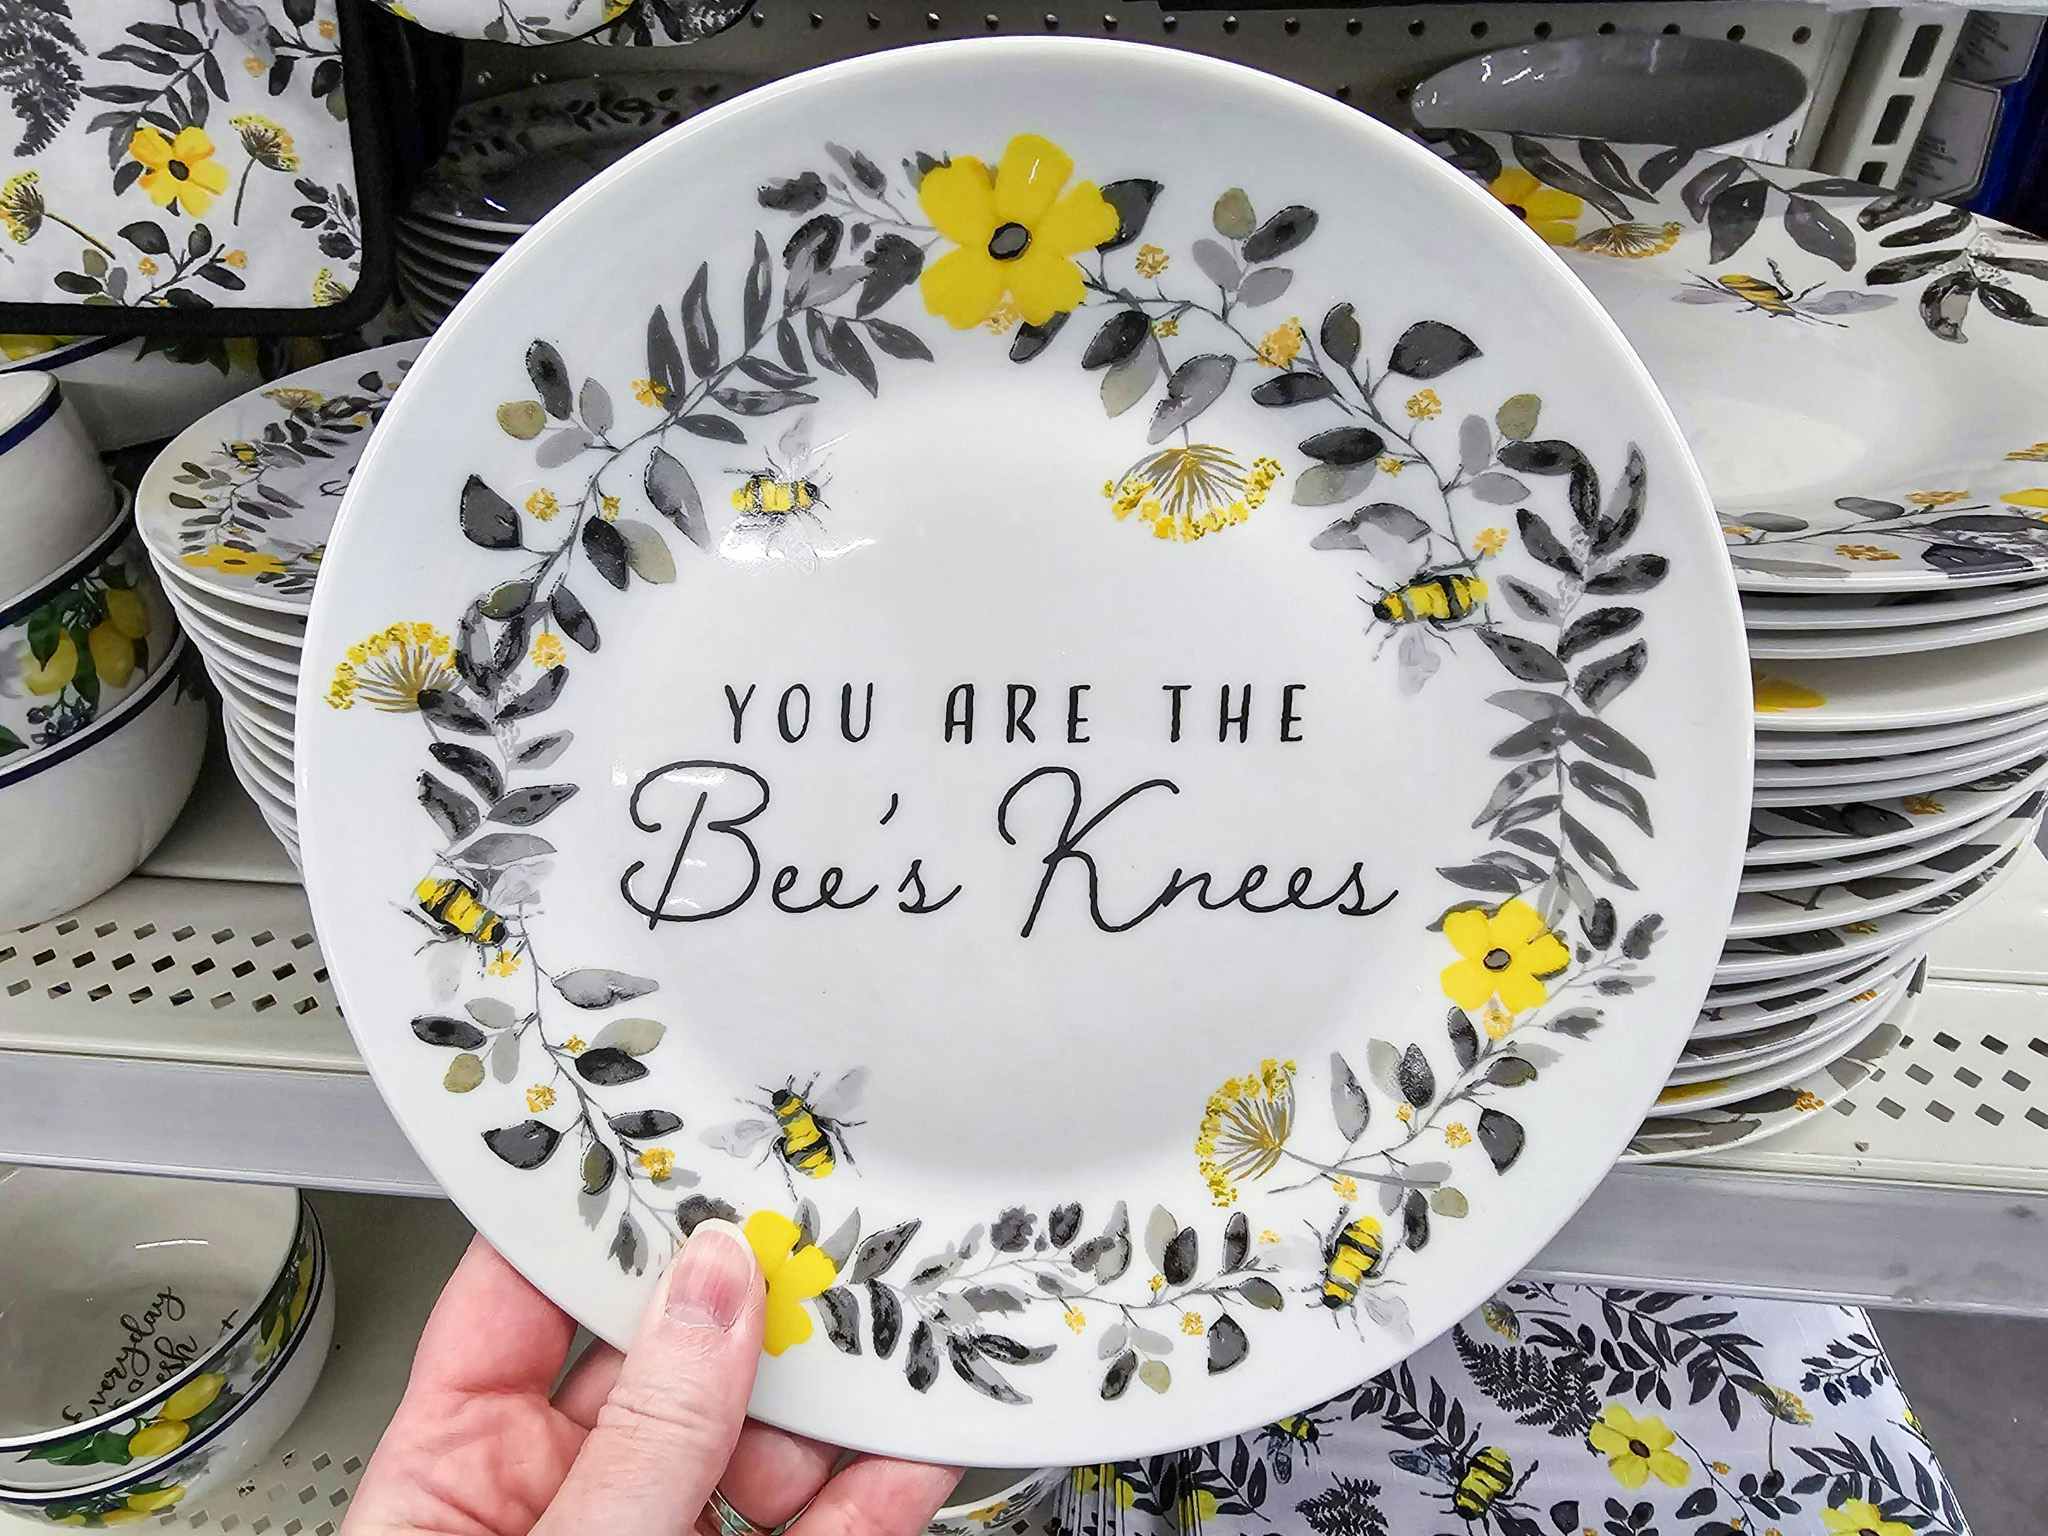 person holding a plate that says "you are the bee's knees"